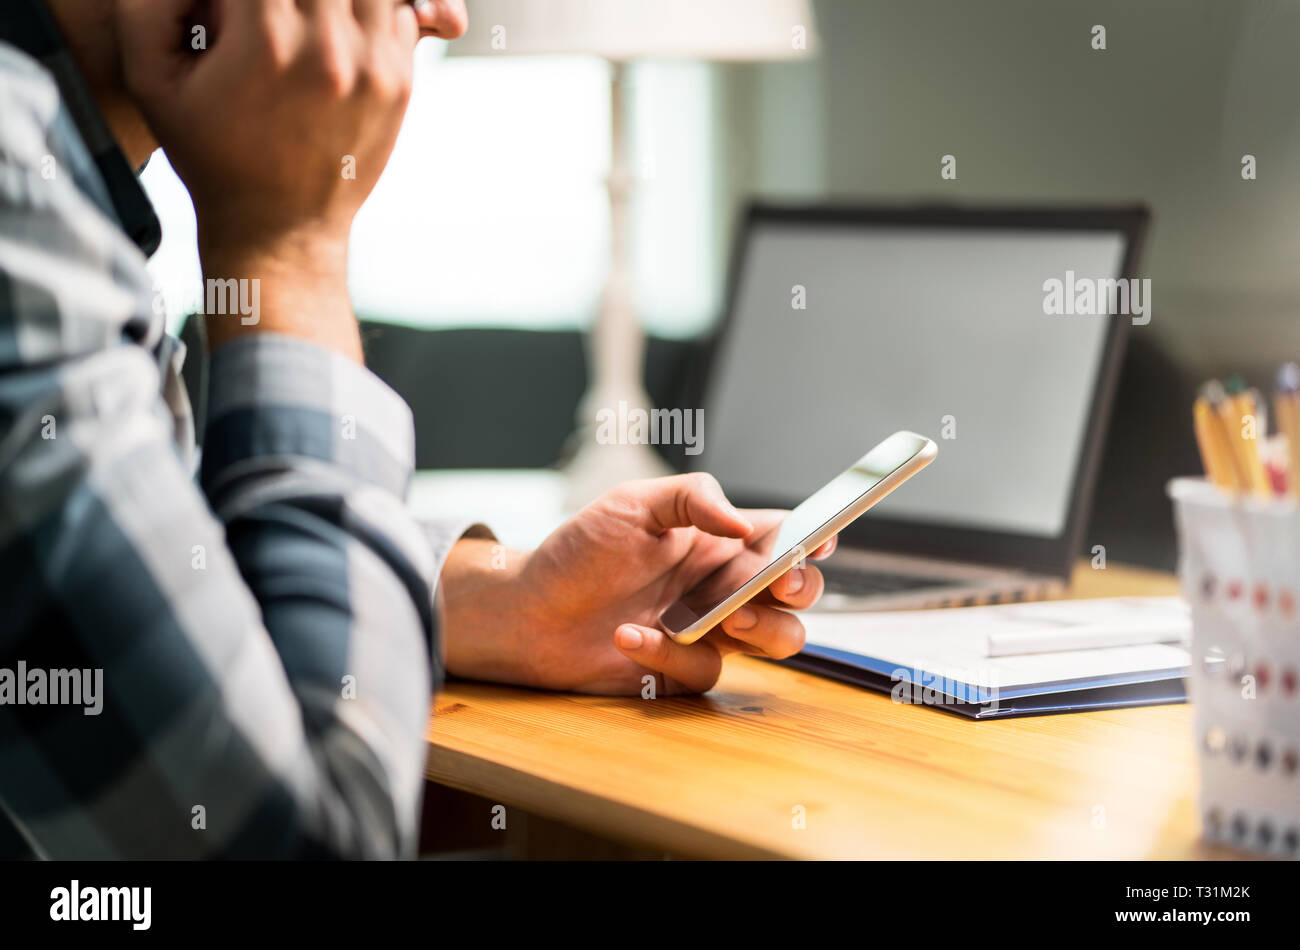 Lazy worker using phone in office avoiding work. Bored, sad or unhappy man leaning against hand and browsing social media on internet with smartphone. Stock Photo